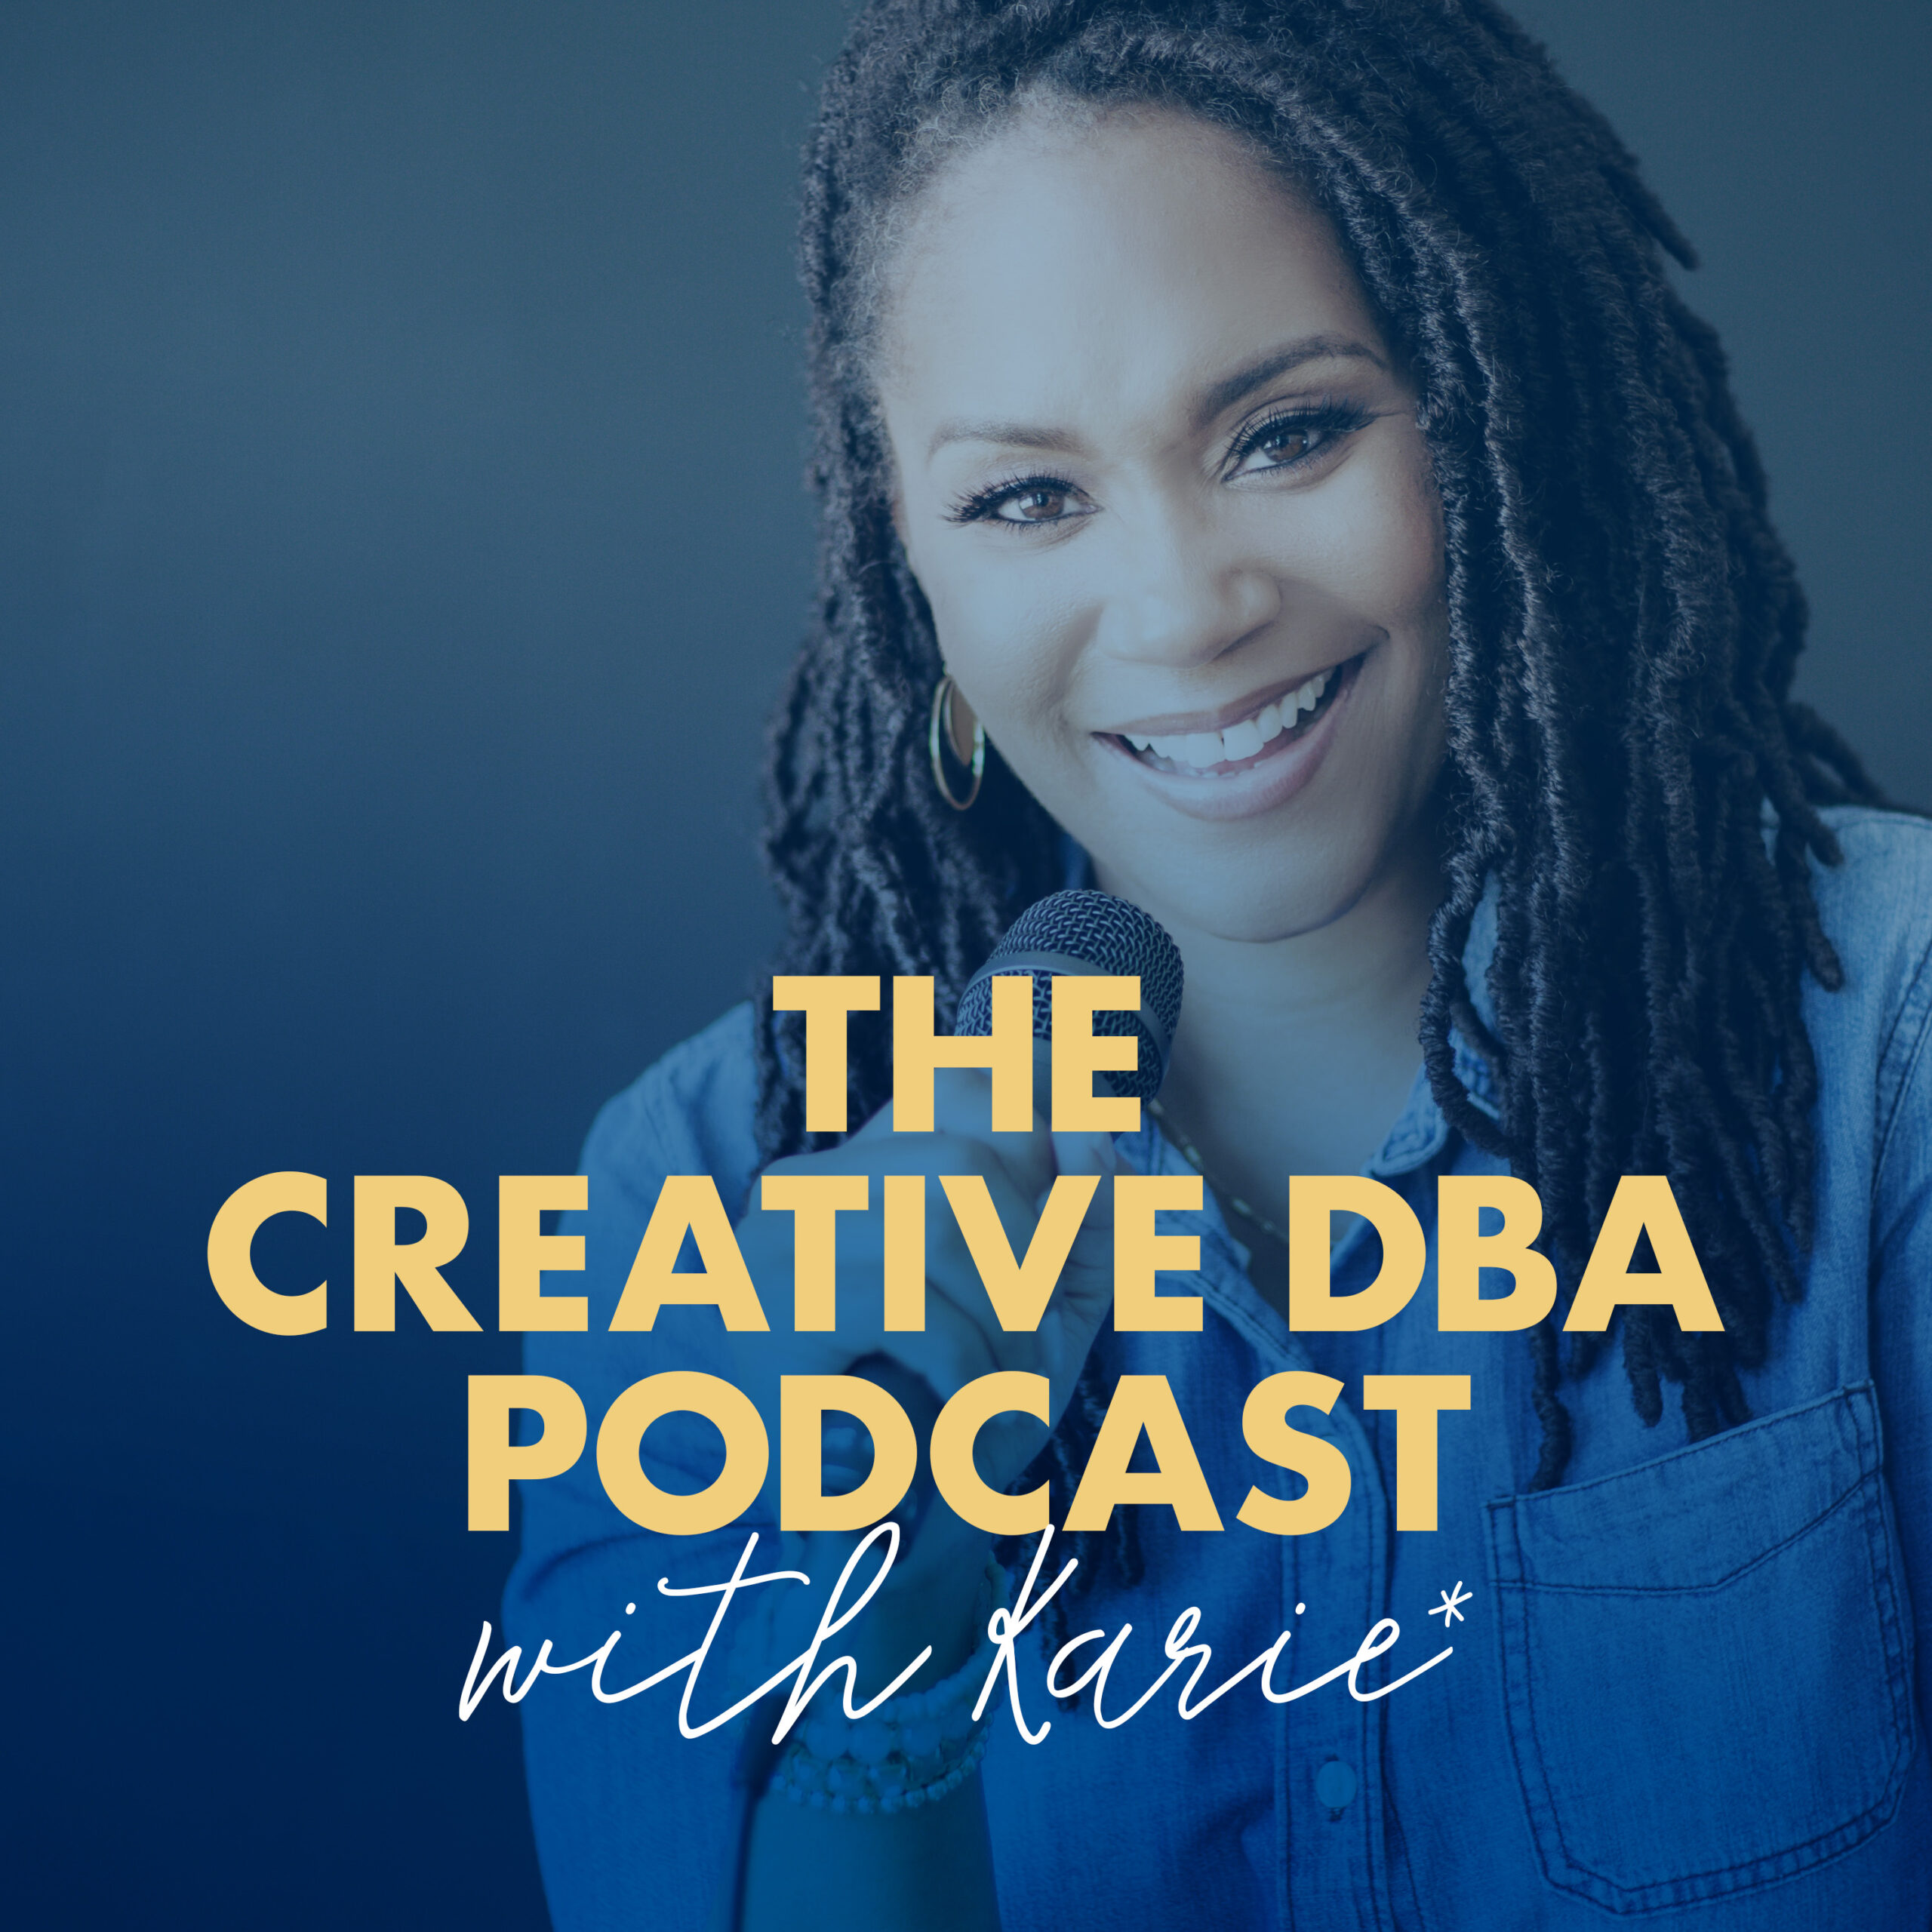 The Creative DBA Podcast with Karie* graphic featuring Karie talking into a microphone